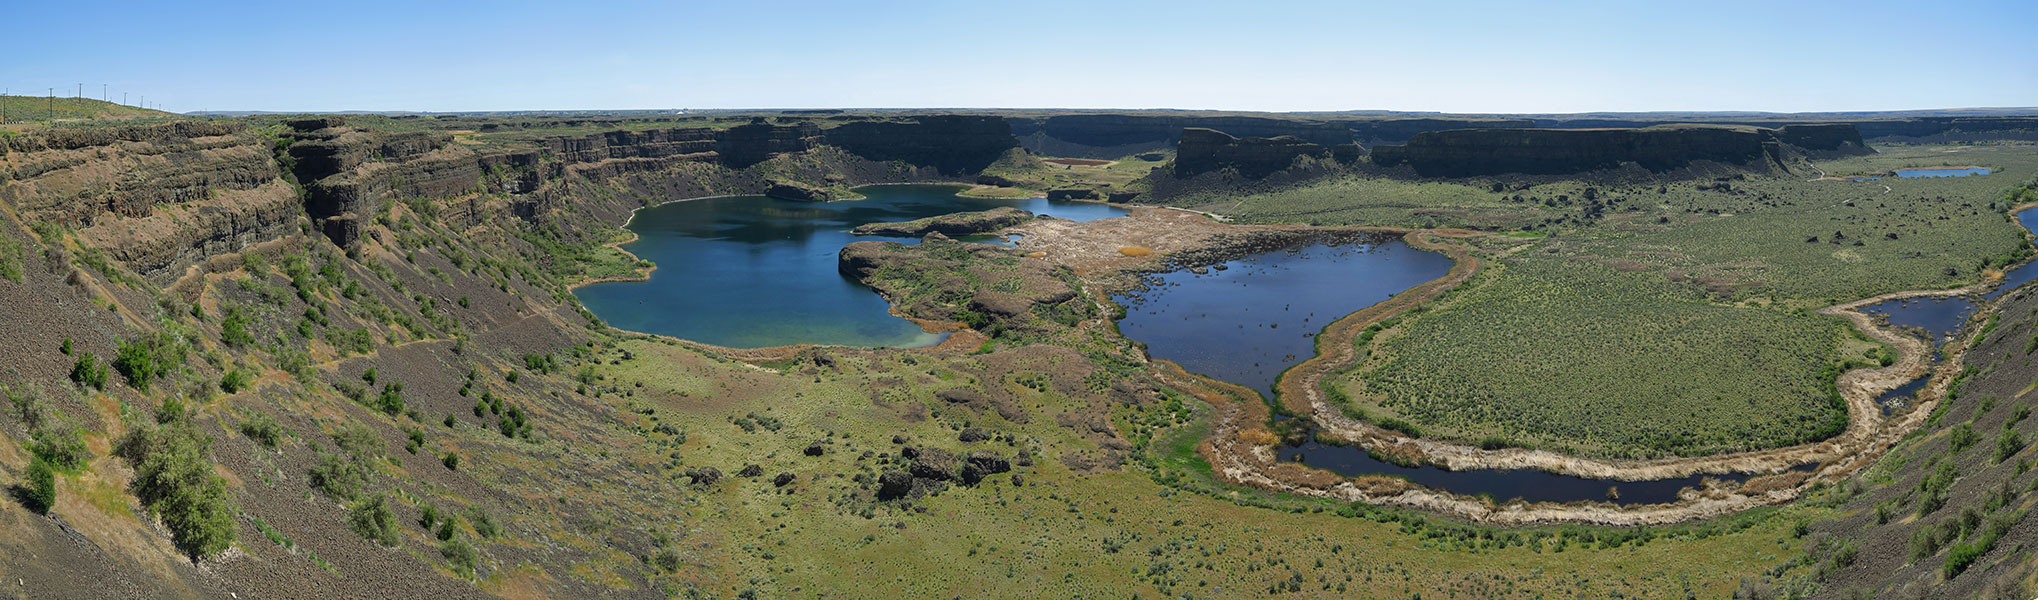 Grand Coulee & Dry Falls panorama [Dry Falls Overlook, Sun Lakes/Dry Falls State Park, Grant County, Washington]